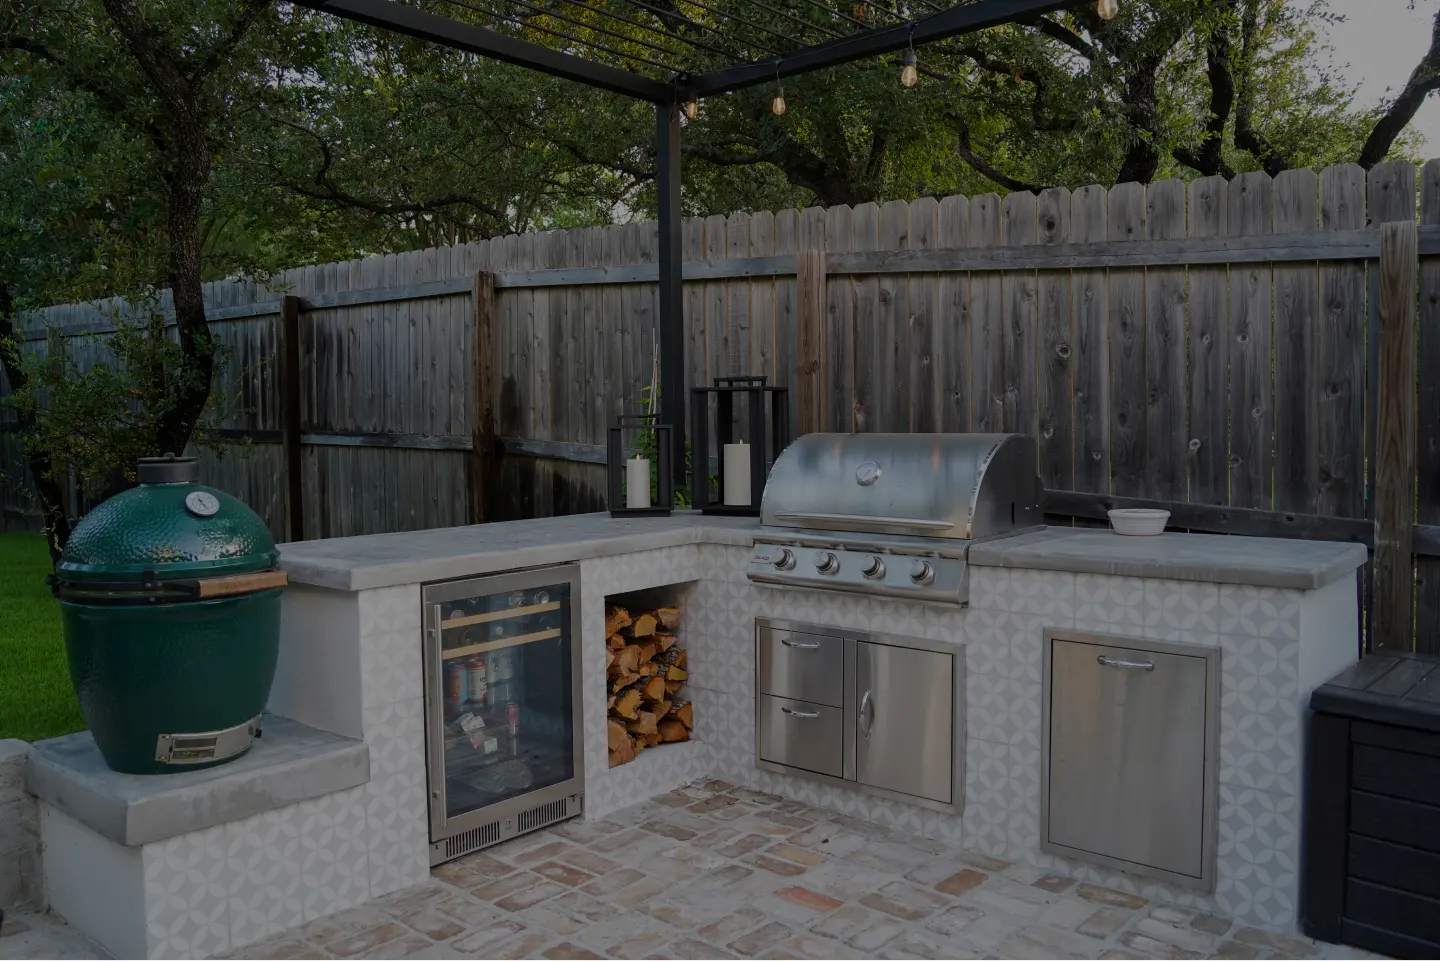 An outdoor galley kitchen with a stove, oven, sink, and open counter space.